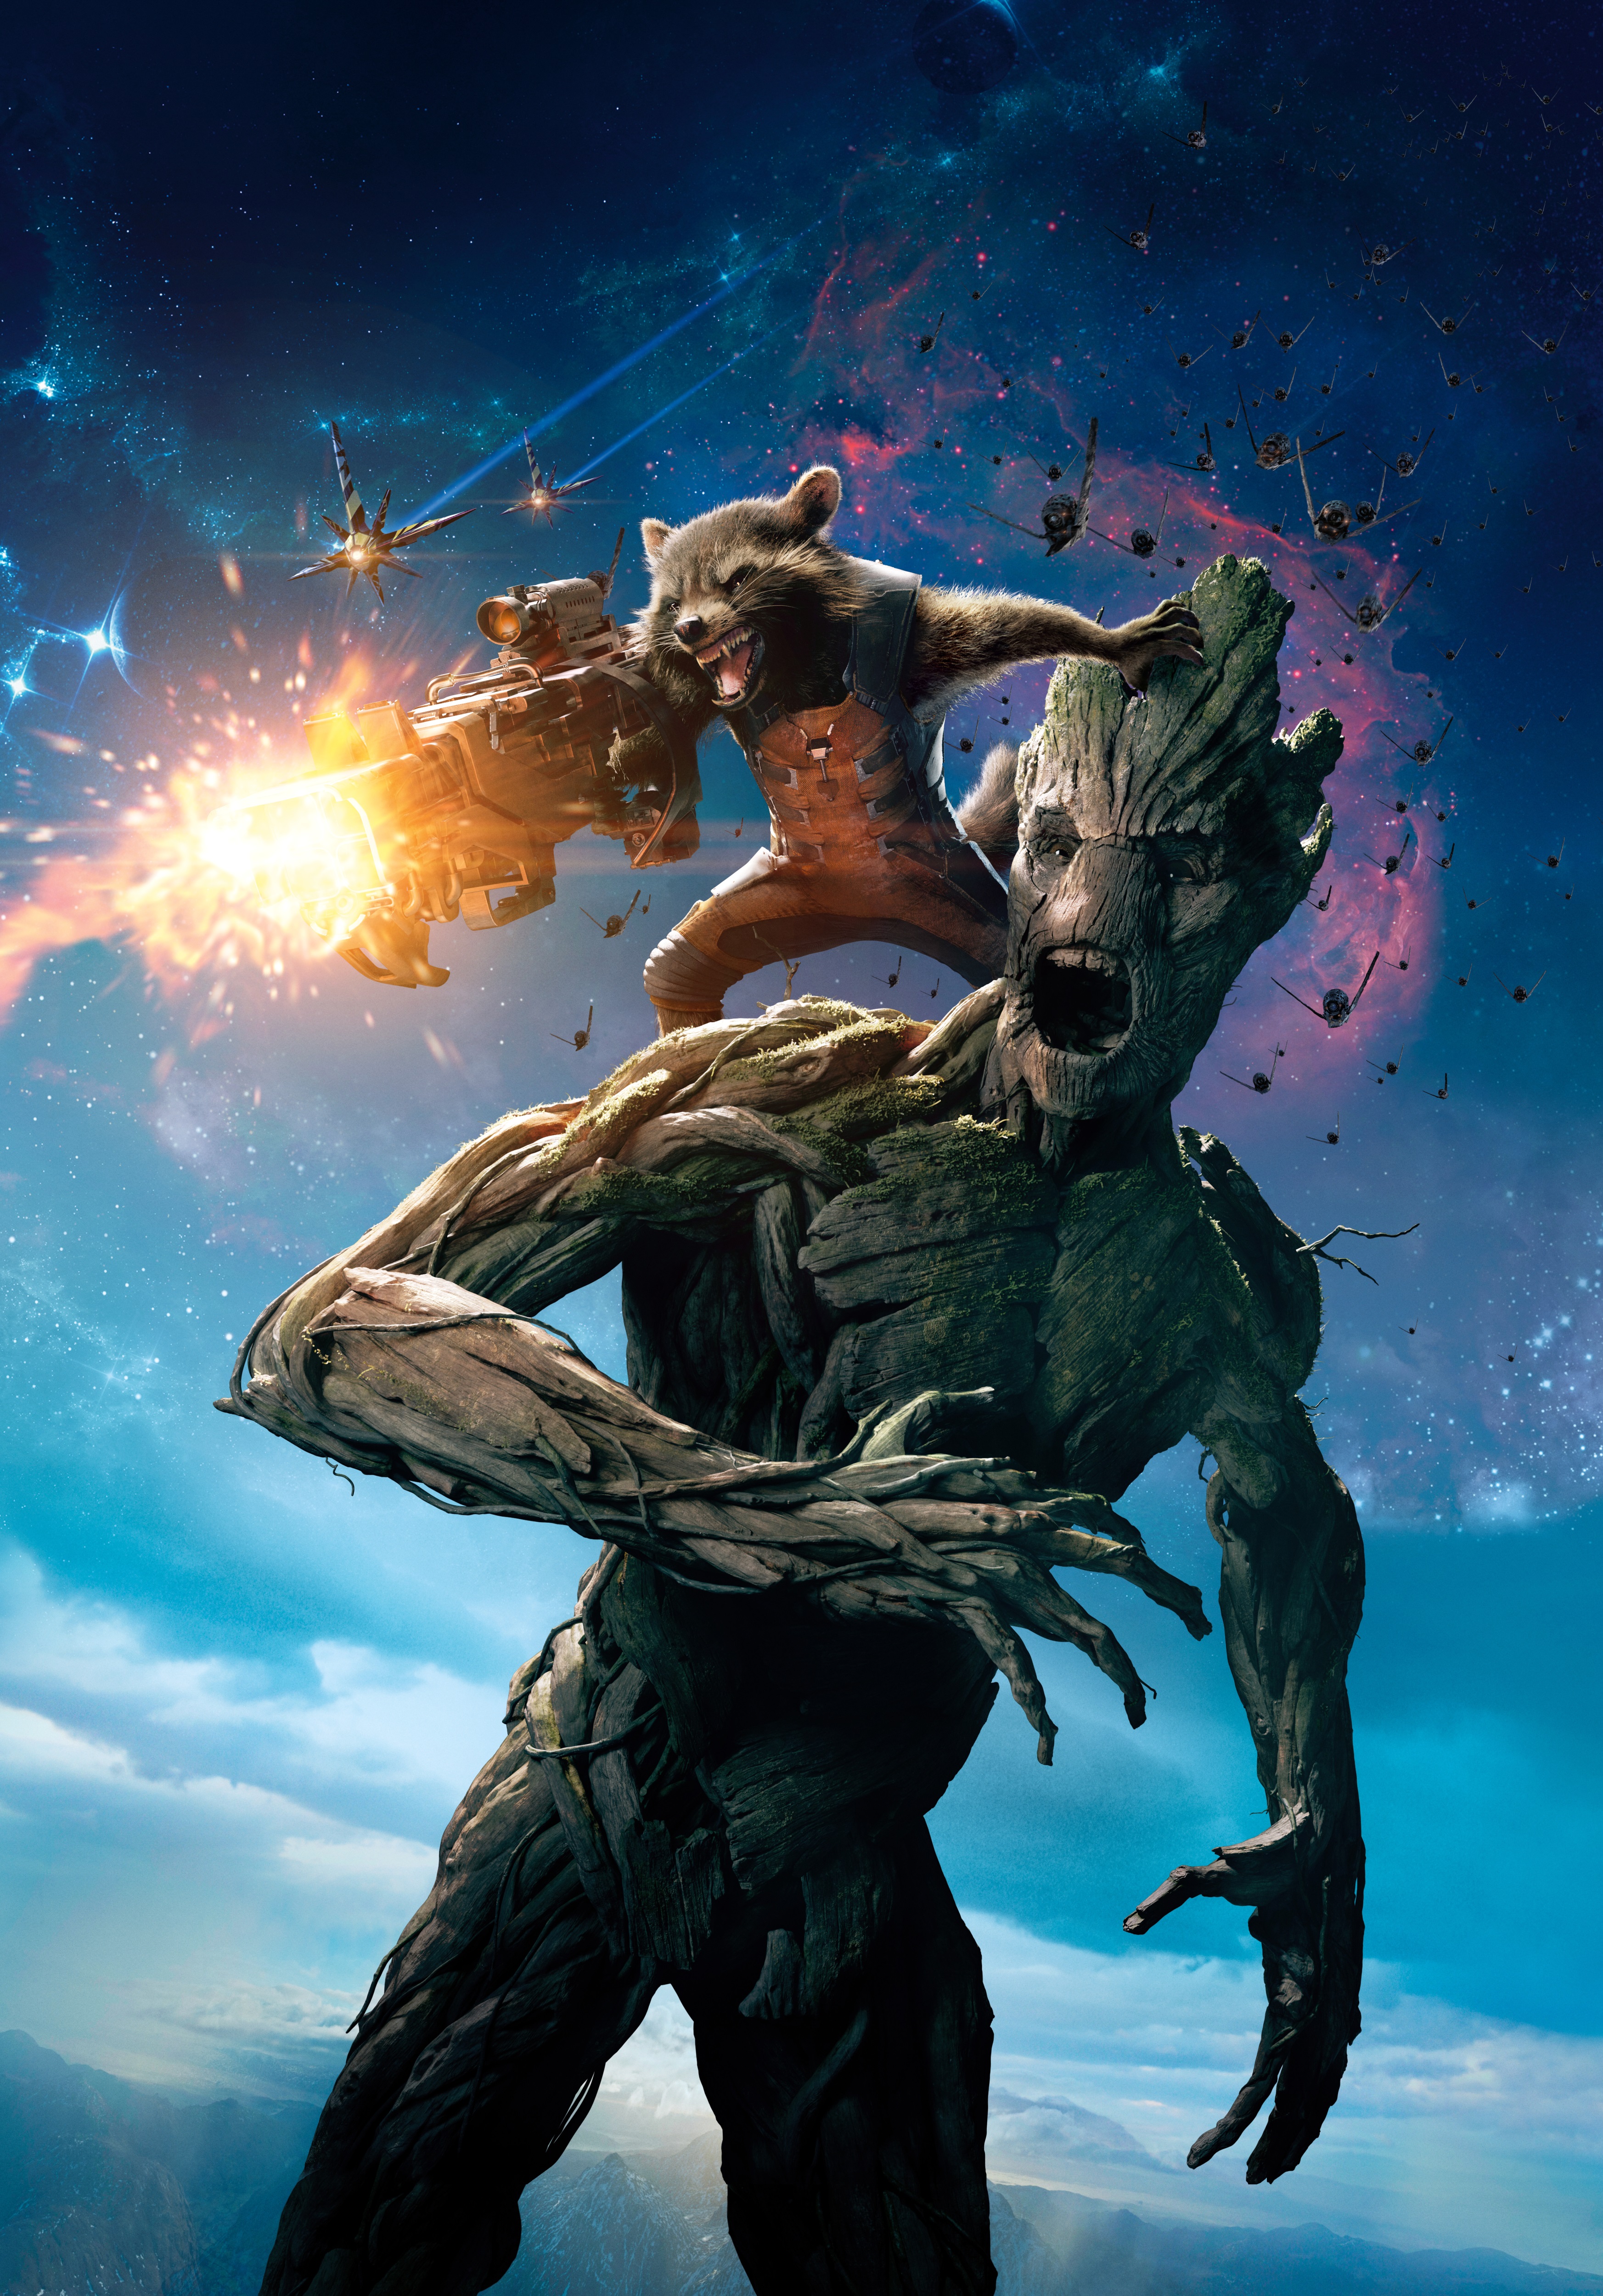 Rocket Raccoon and Groot from Guardians of the Galaxy Desktop Wallpaper